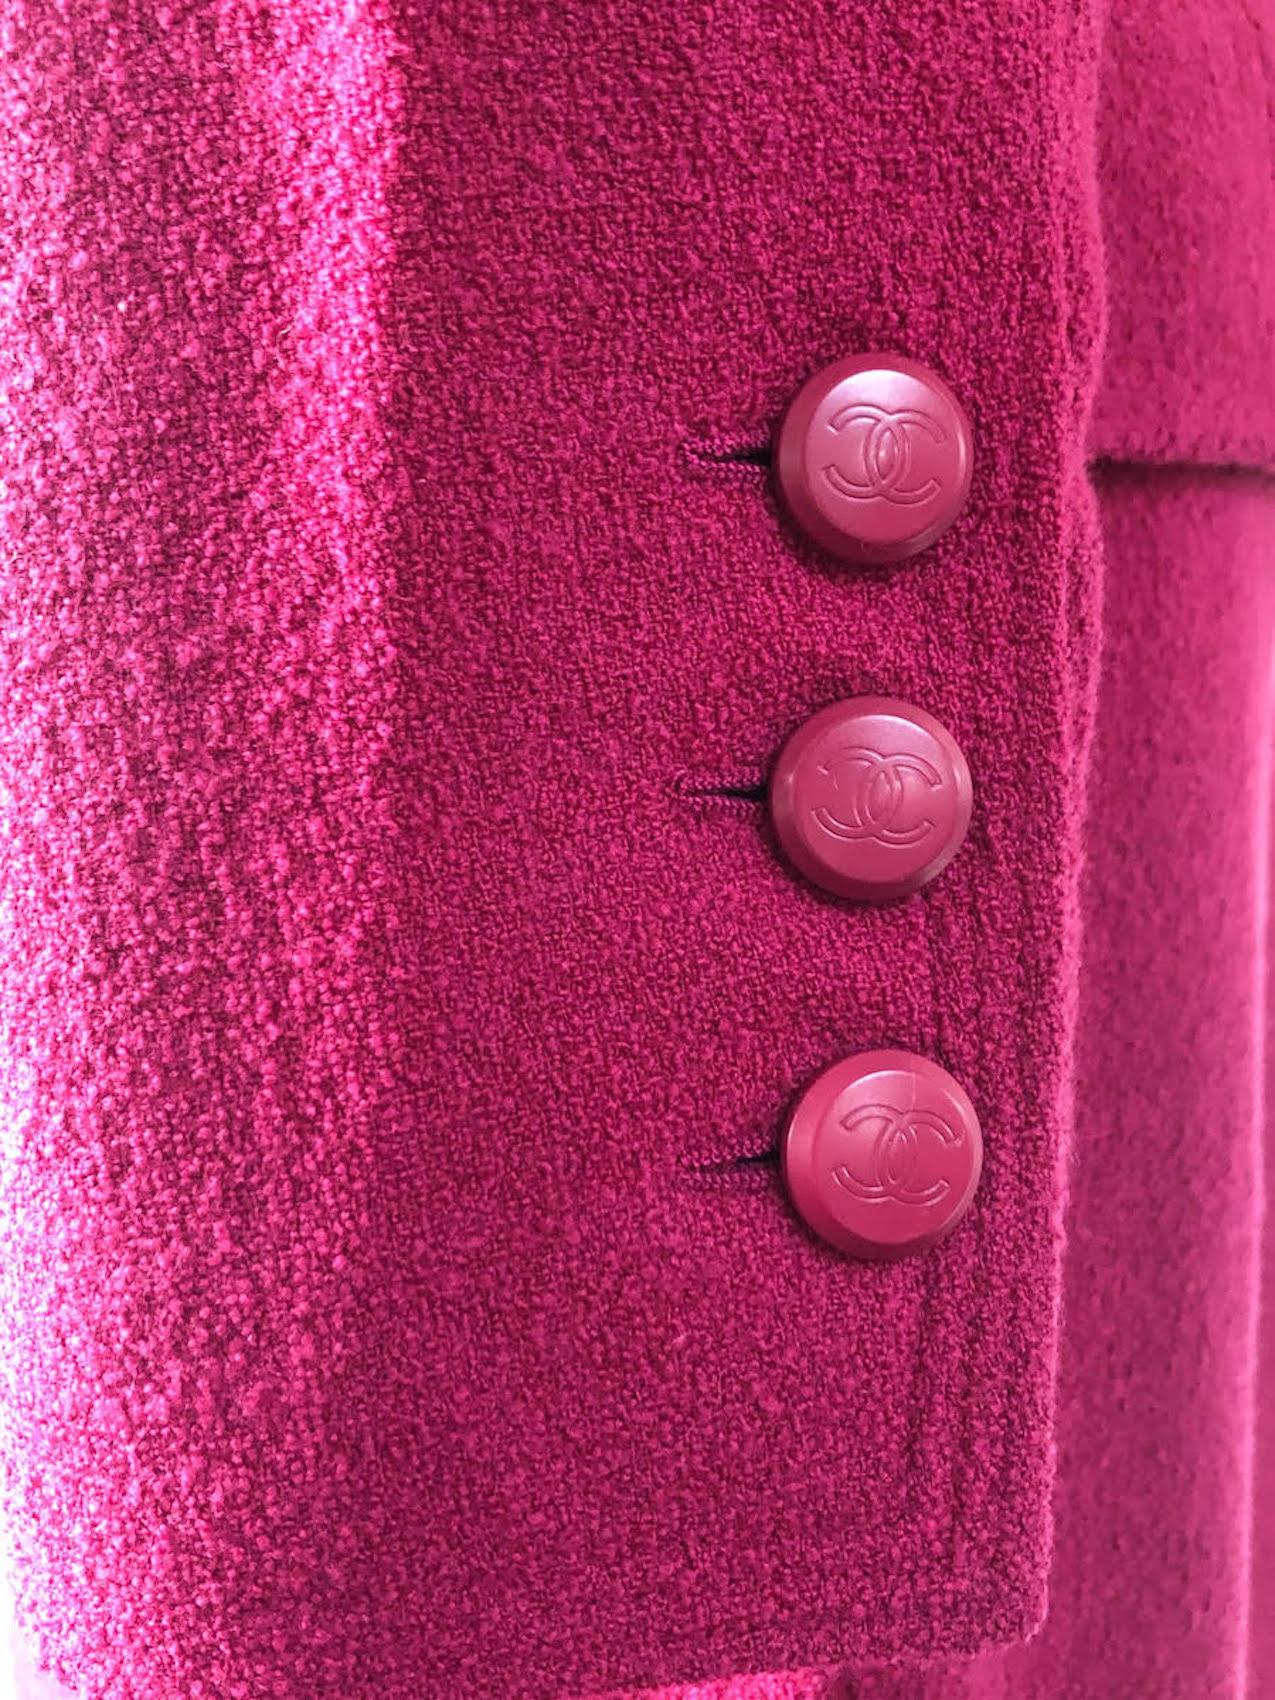 Women's or Men's CHANEL 1998 Wool Jacket Tweed Skirt Suit Pink CC Logo Buttons